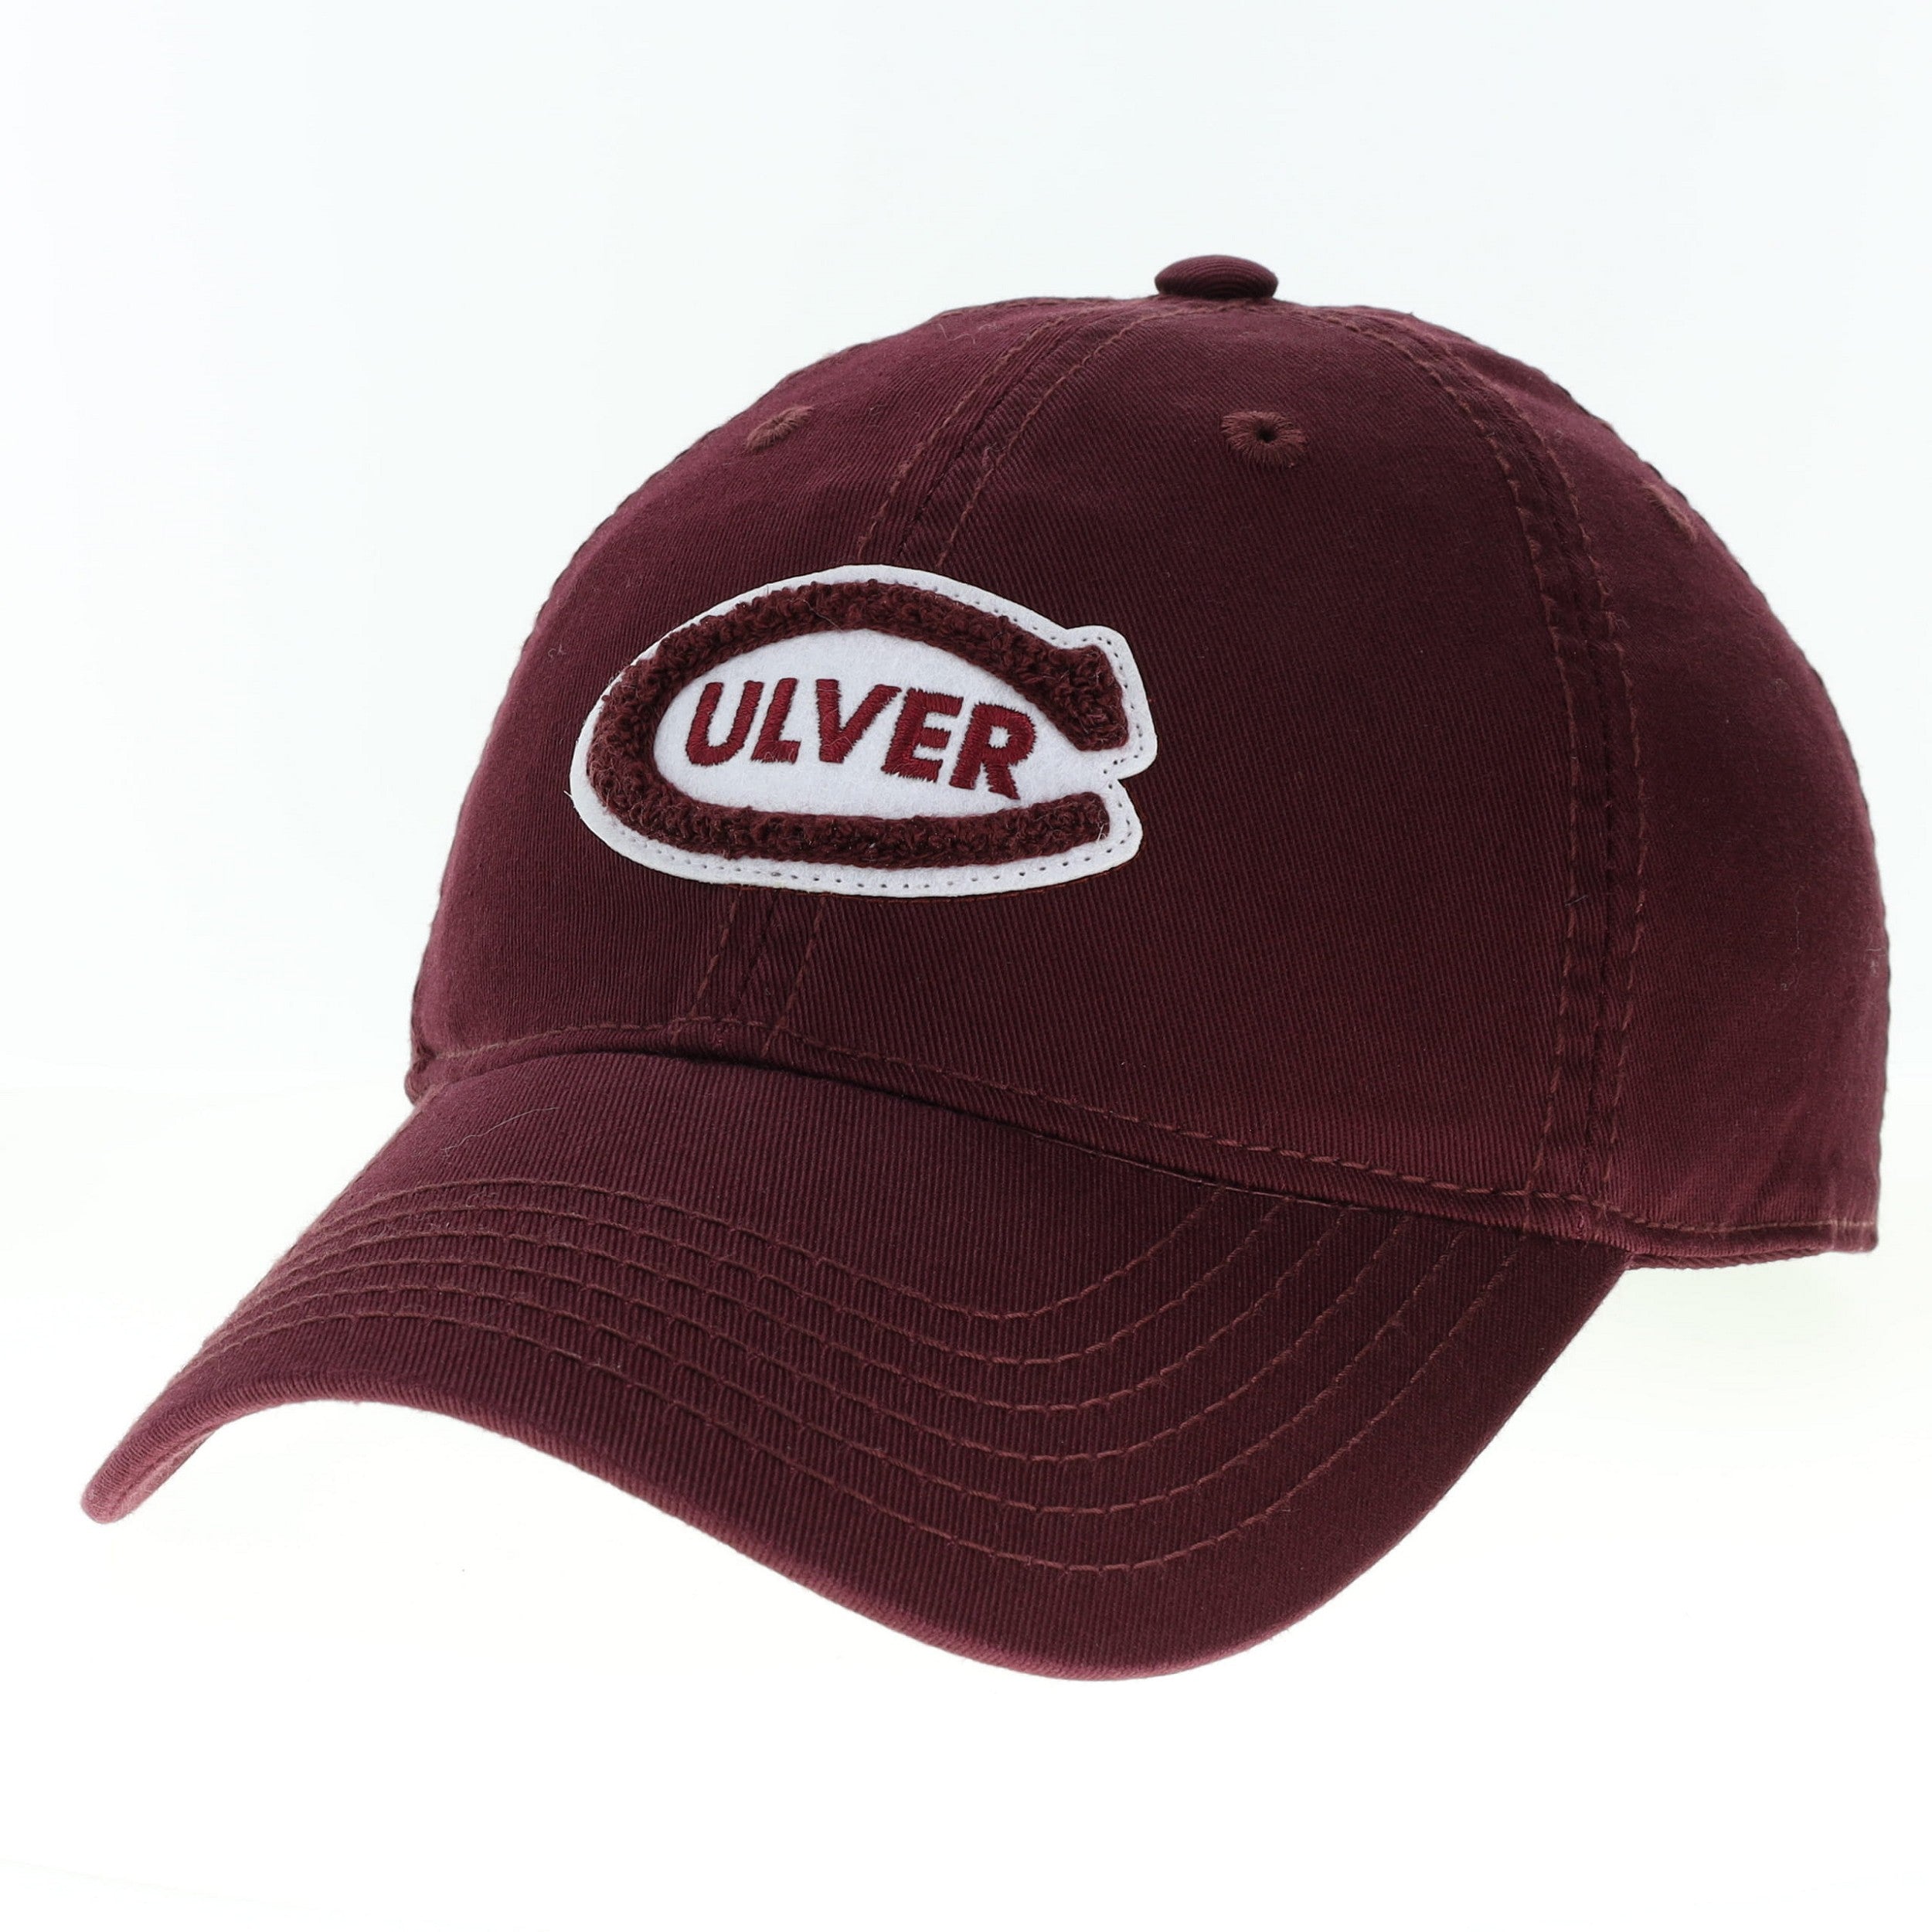 Chenille Varsity Culver Relaxed Twill Hat - Maroon